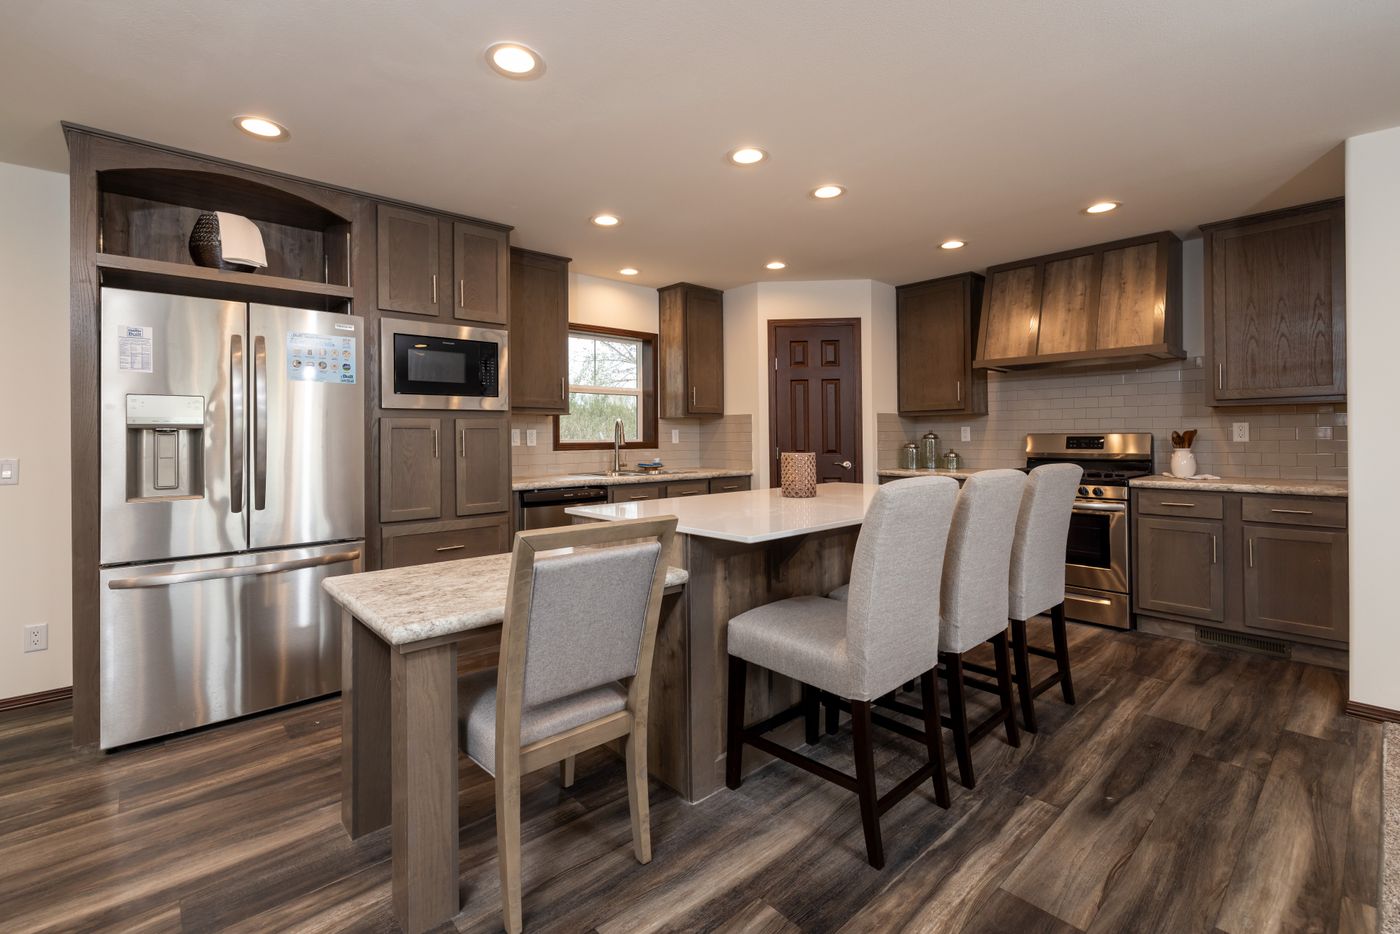 The LEGACY 327 Kitchen. This Manufactured Mobile Home features 3 bedrooms and 2 baths.